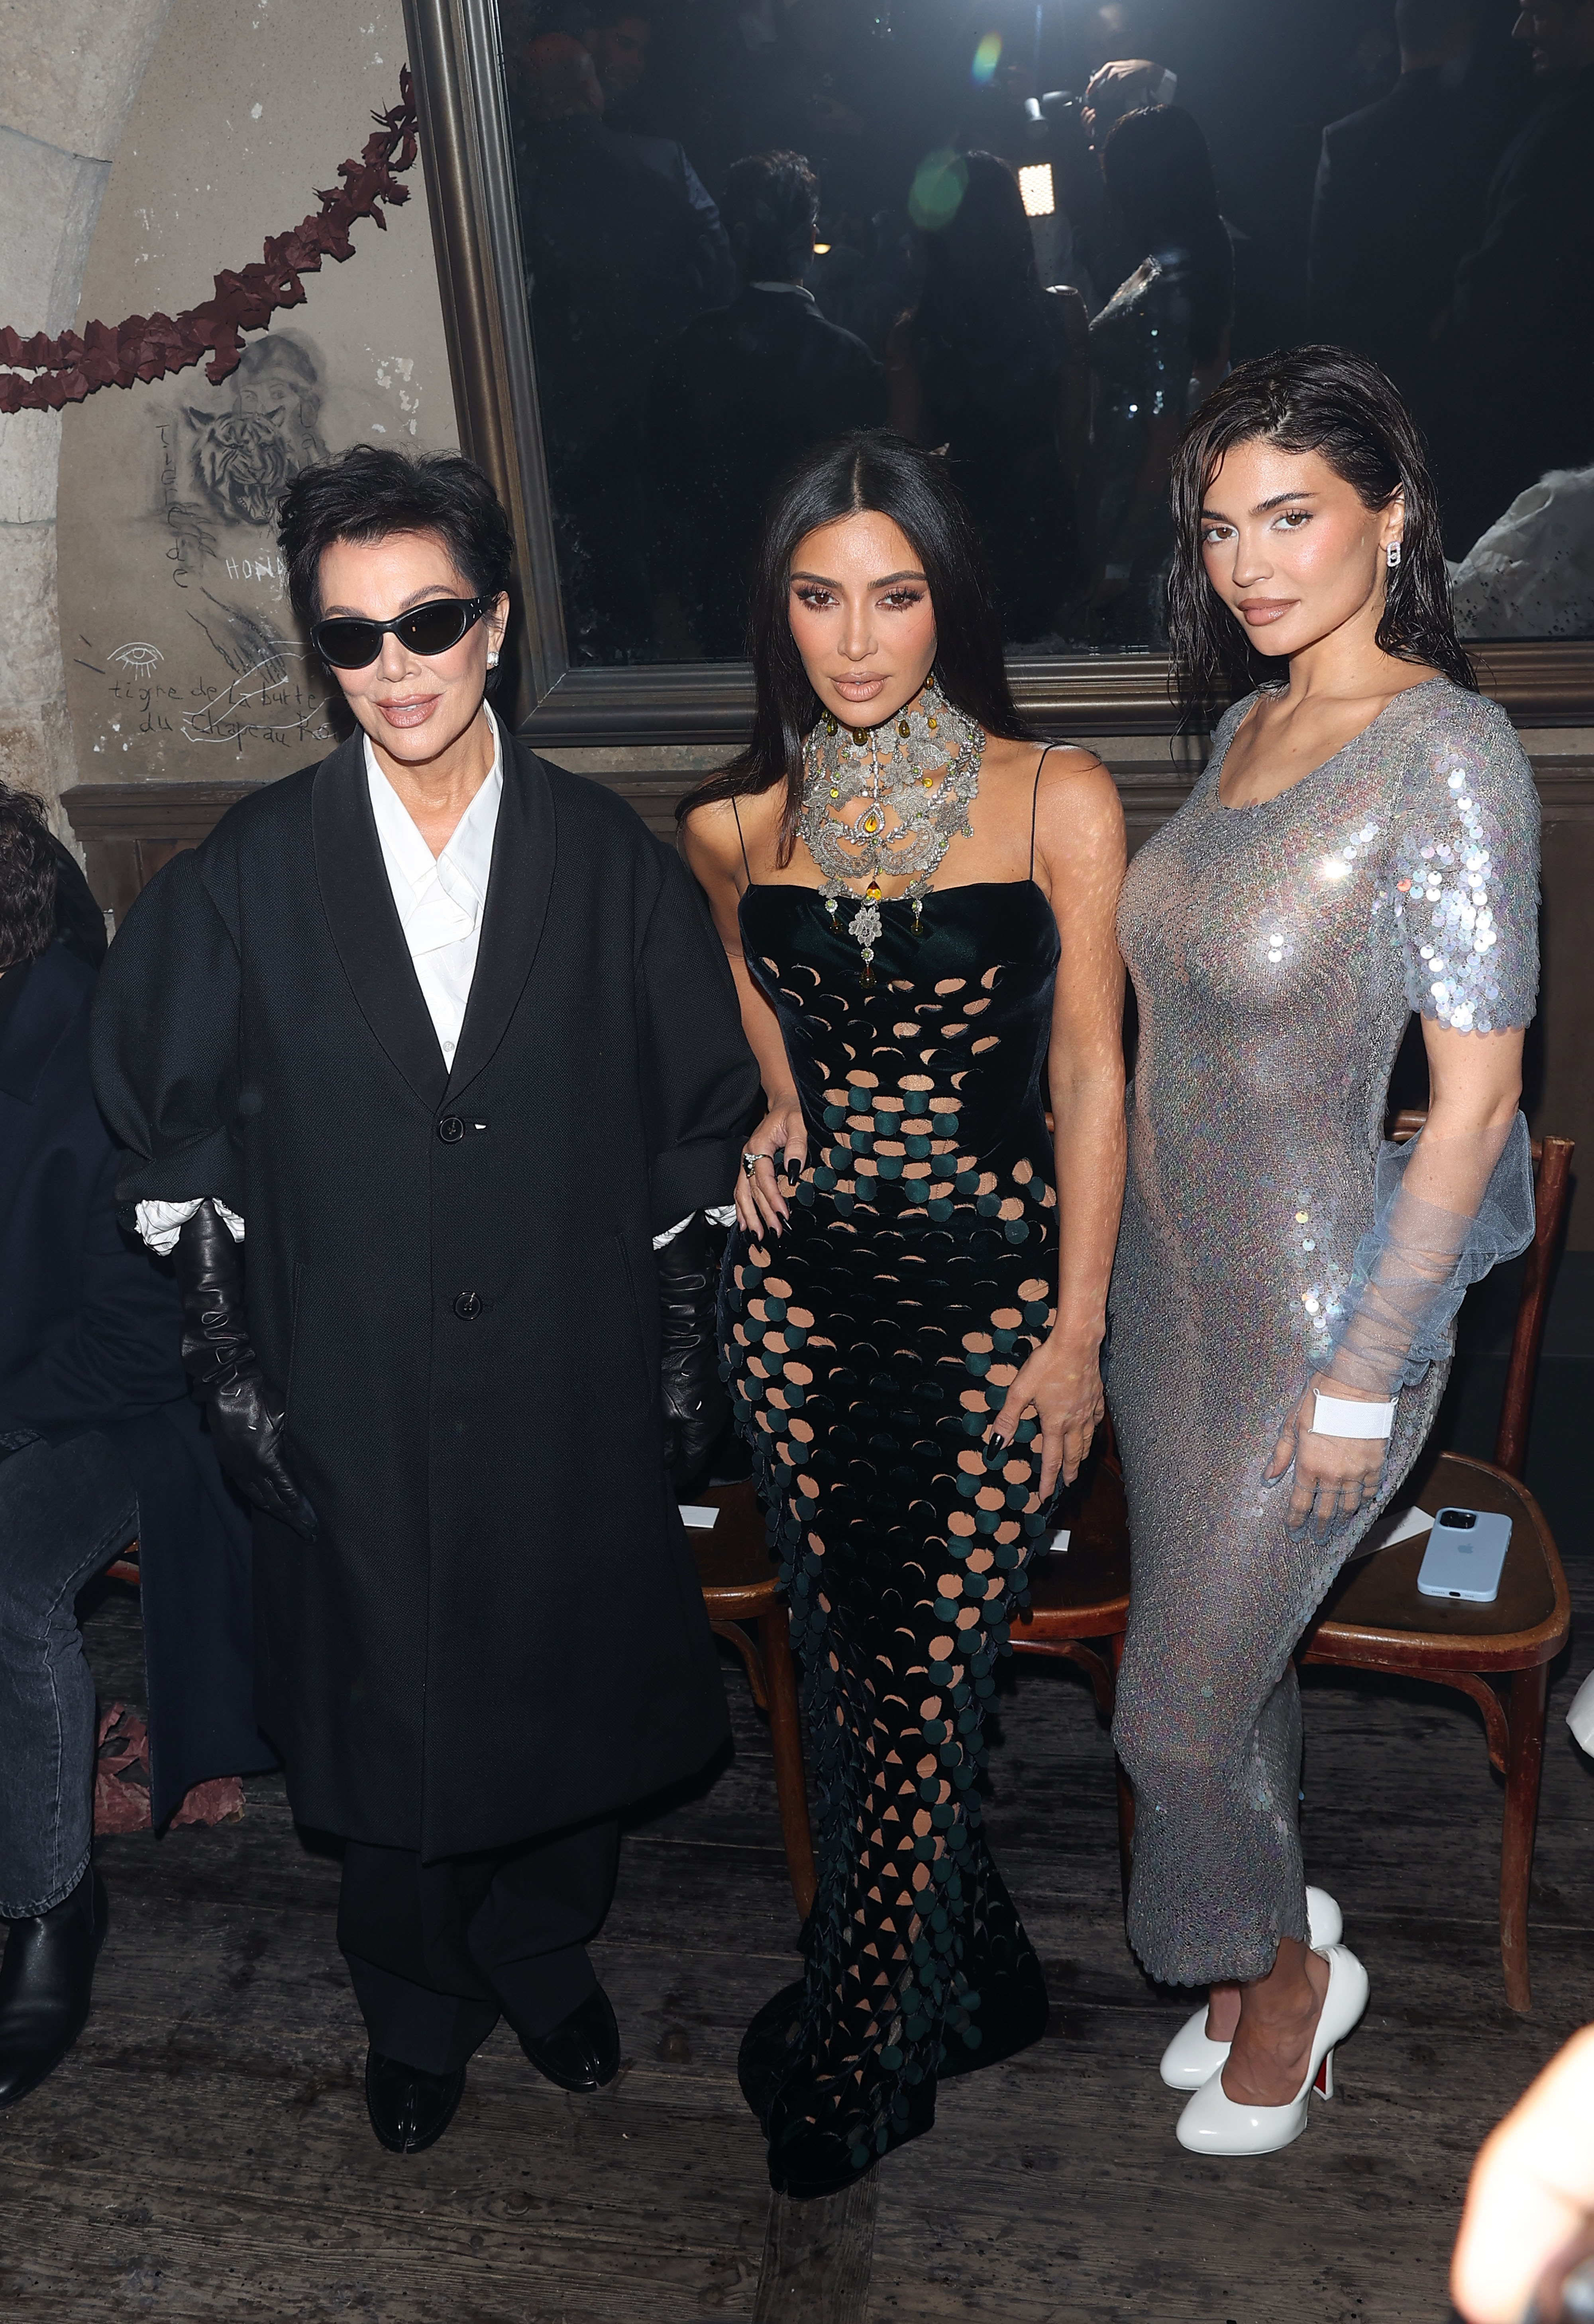 Kris Jenner, Kim Kardashian, and Kylie Jenner posing in stylish outfits at an event. Kim in a unique cut-out dress; Kylie in a shimmering gown